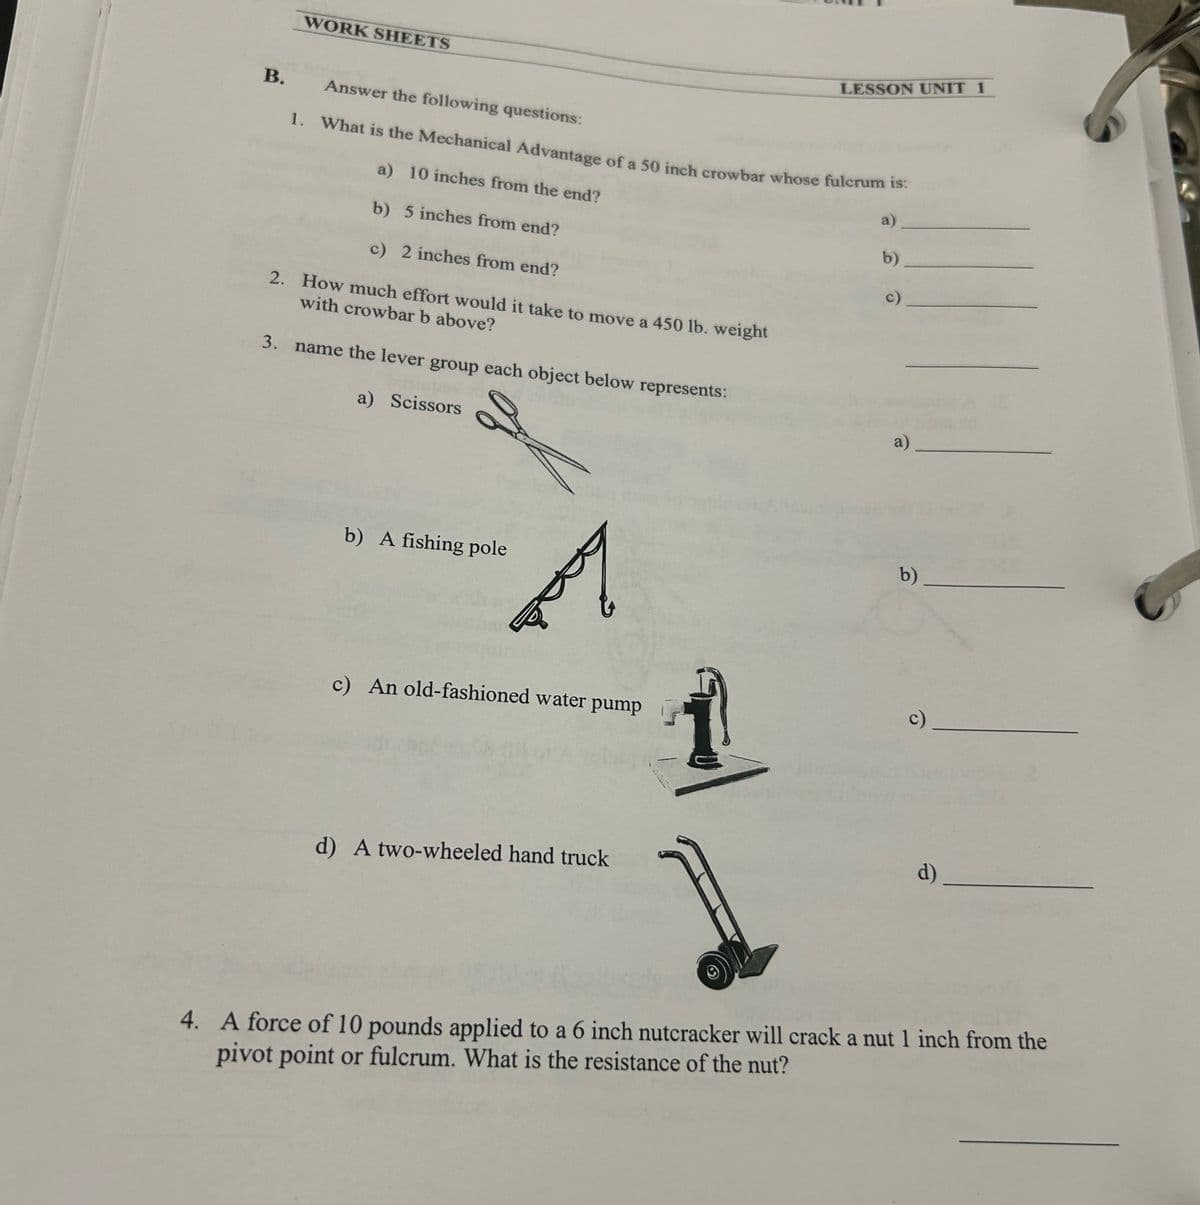 WORK SHEETS
B.
Answer the following questions:
LESSON UNIT 1
1. What is the Mechanical Advantage of a 50 inch crowbar whose fulcrum is:
a) 10 inches from the end?
b) 5 inches from end?
c) 2 inches from end?
2. How much effort would it take to move a 450 lb. weight
with crowbar b above?
3. name the lever group each object below represents:
a)
b)
c)
a) Scissors
b) A fishing pole
c) An old-fashioned water pump
d) A two-wheeled hand truck
a)
b)
c)
d)
4. A force of 10 pounds applied to a 6 inch nutcracker will crack a nut 1 inch from the
pivot point or fulcrum. What is the resistance of the nut?